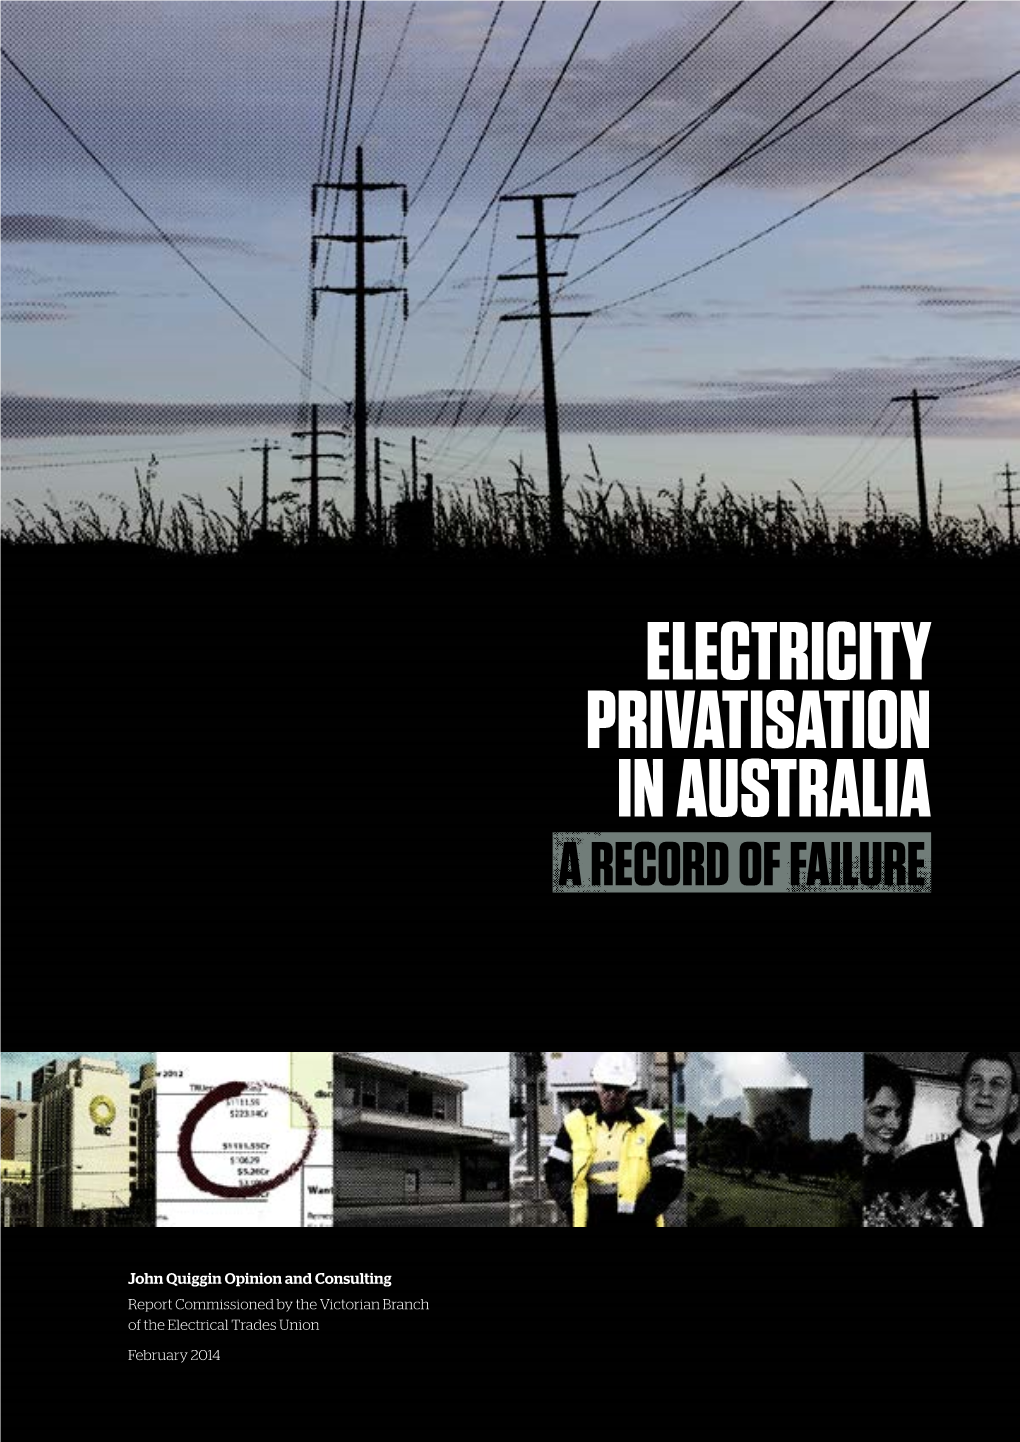 Electricity Privatisation in Australia a Record of Failure